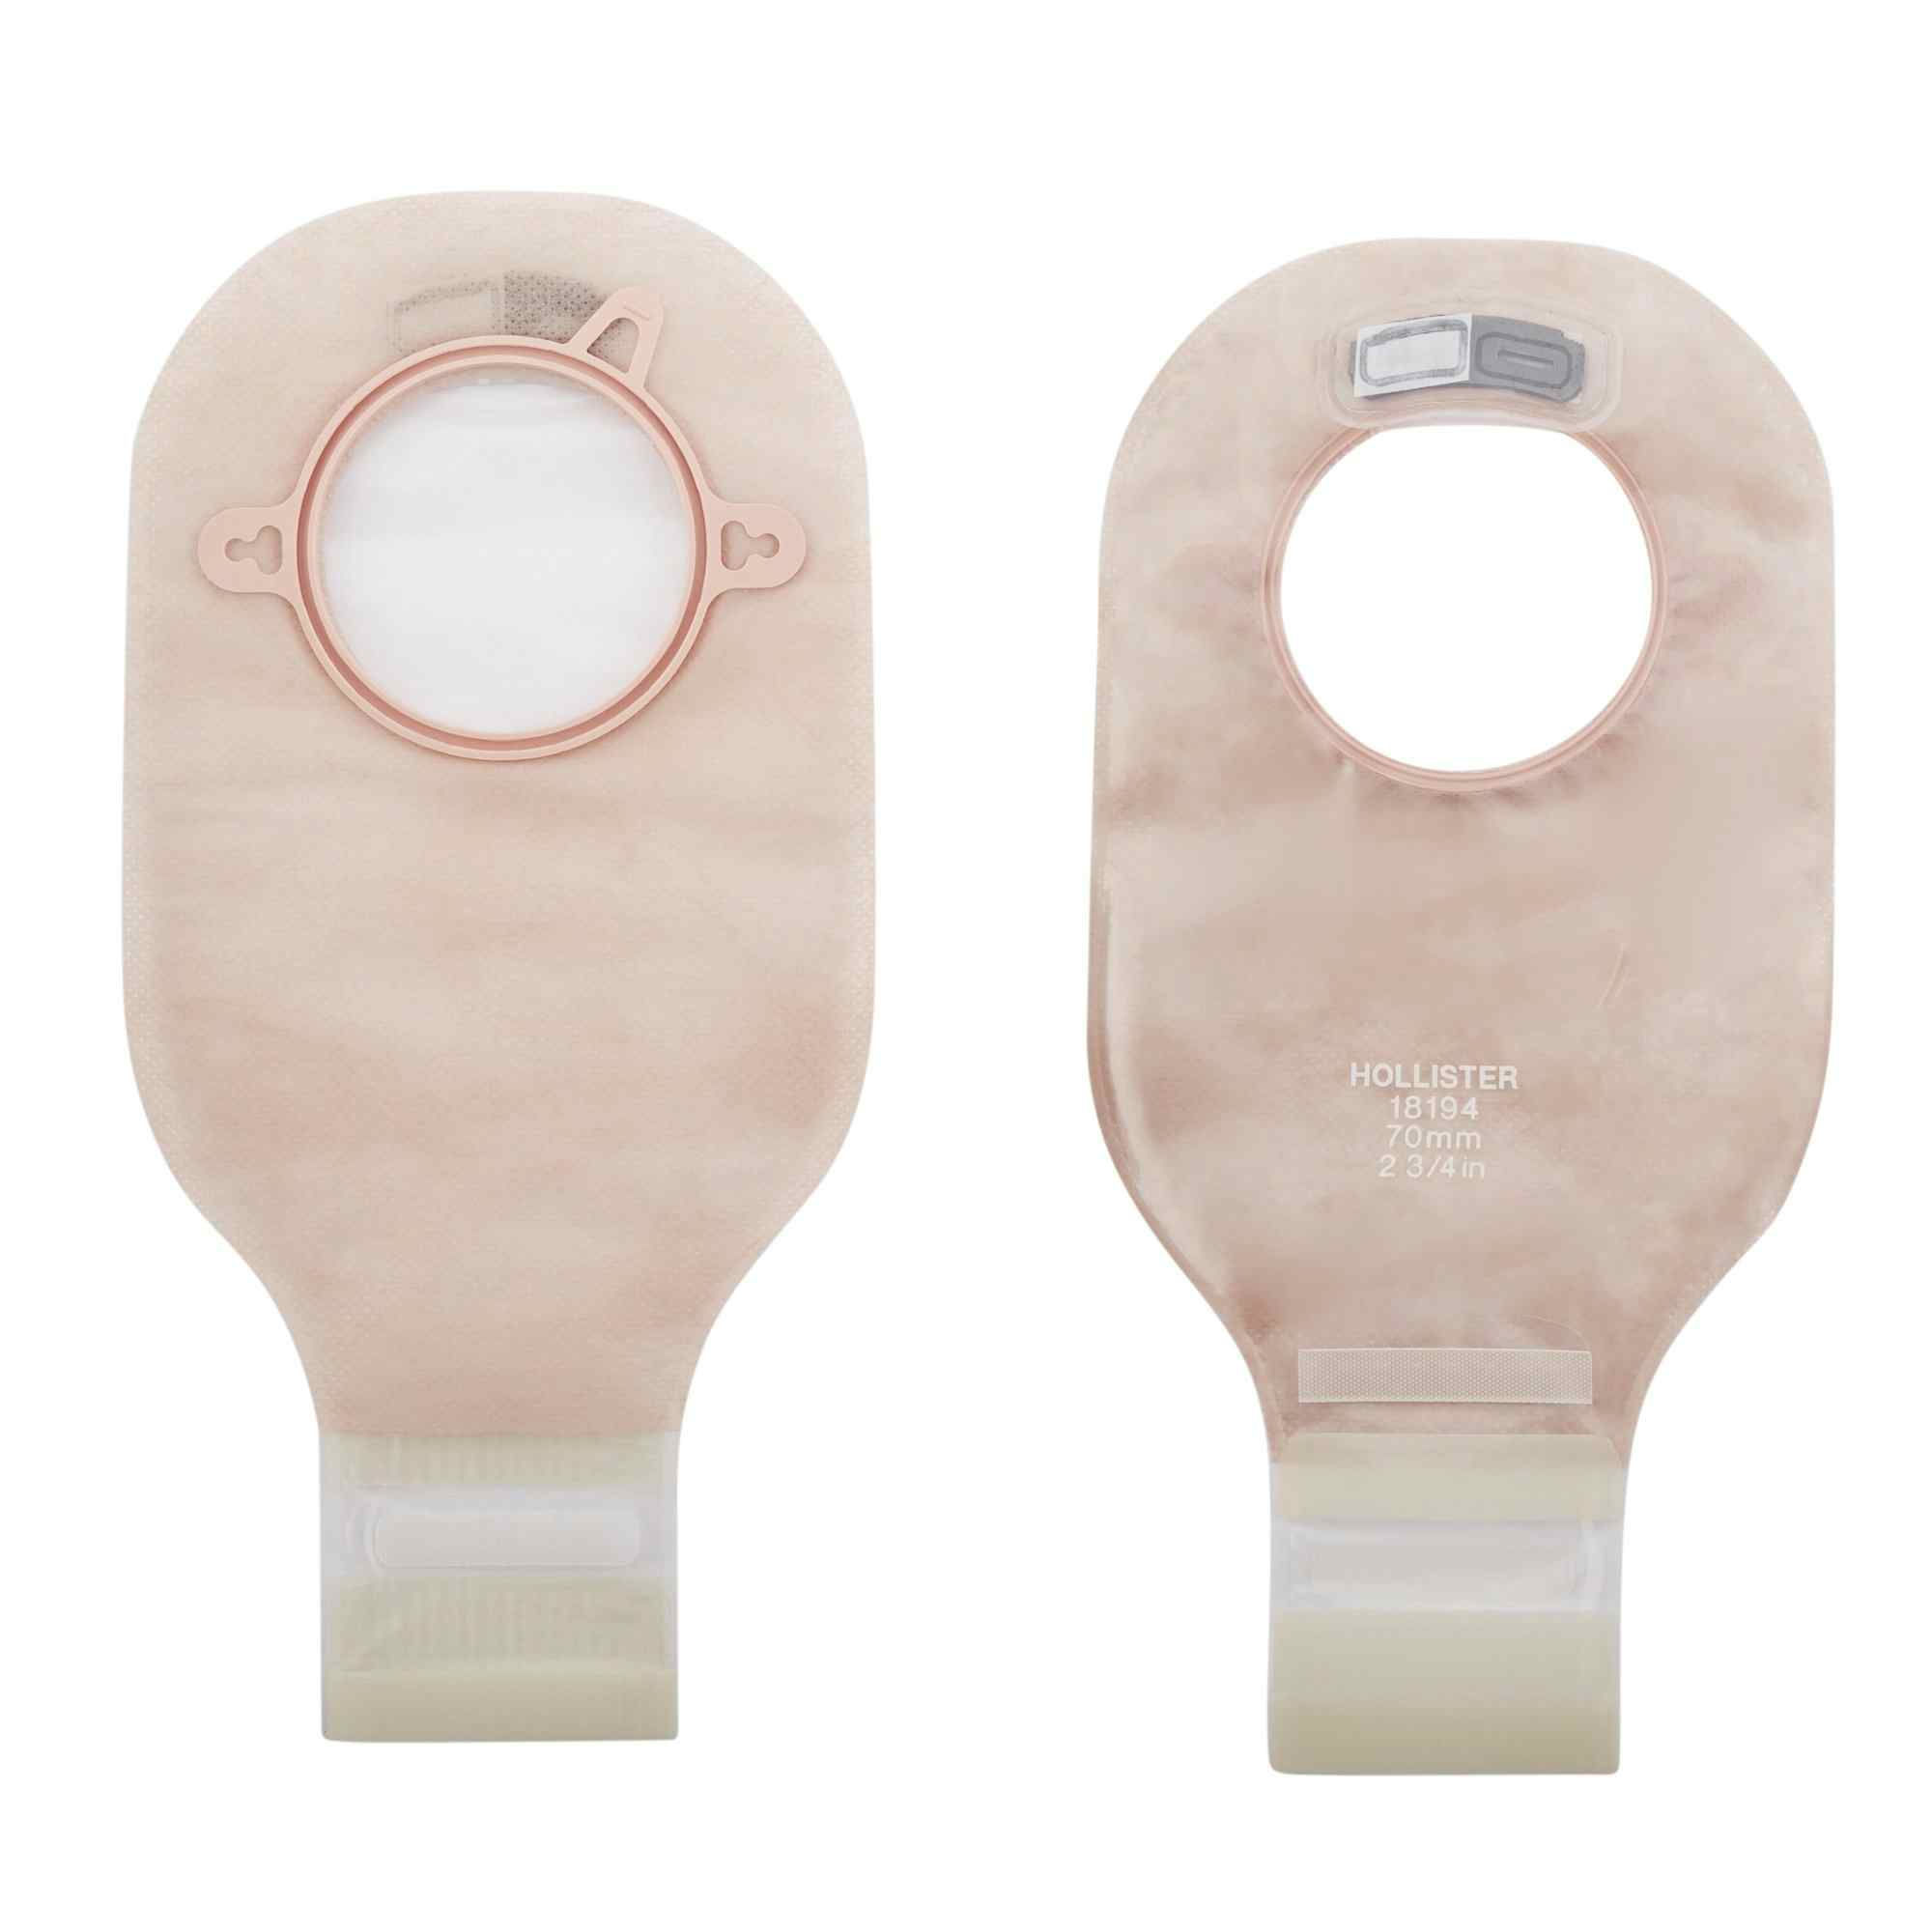 New Image Colostomy Pouch, 12" Length, Drainable, 18194, Transparent - 1 Each